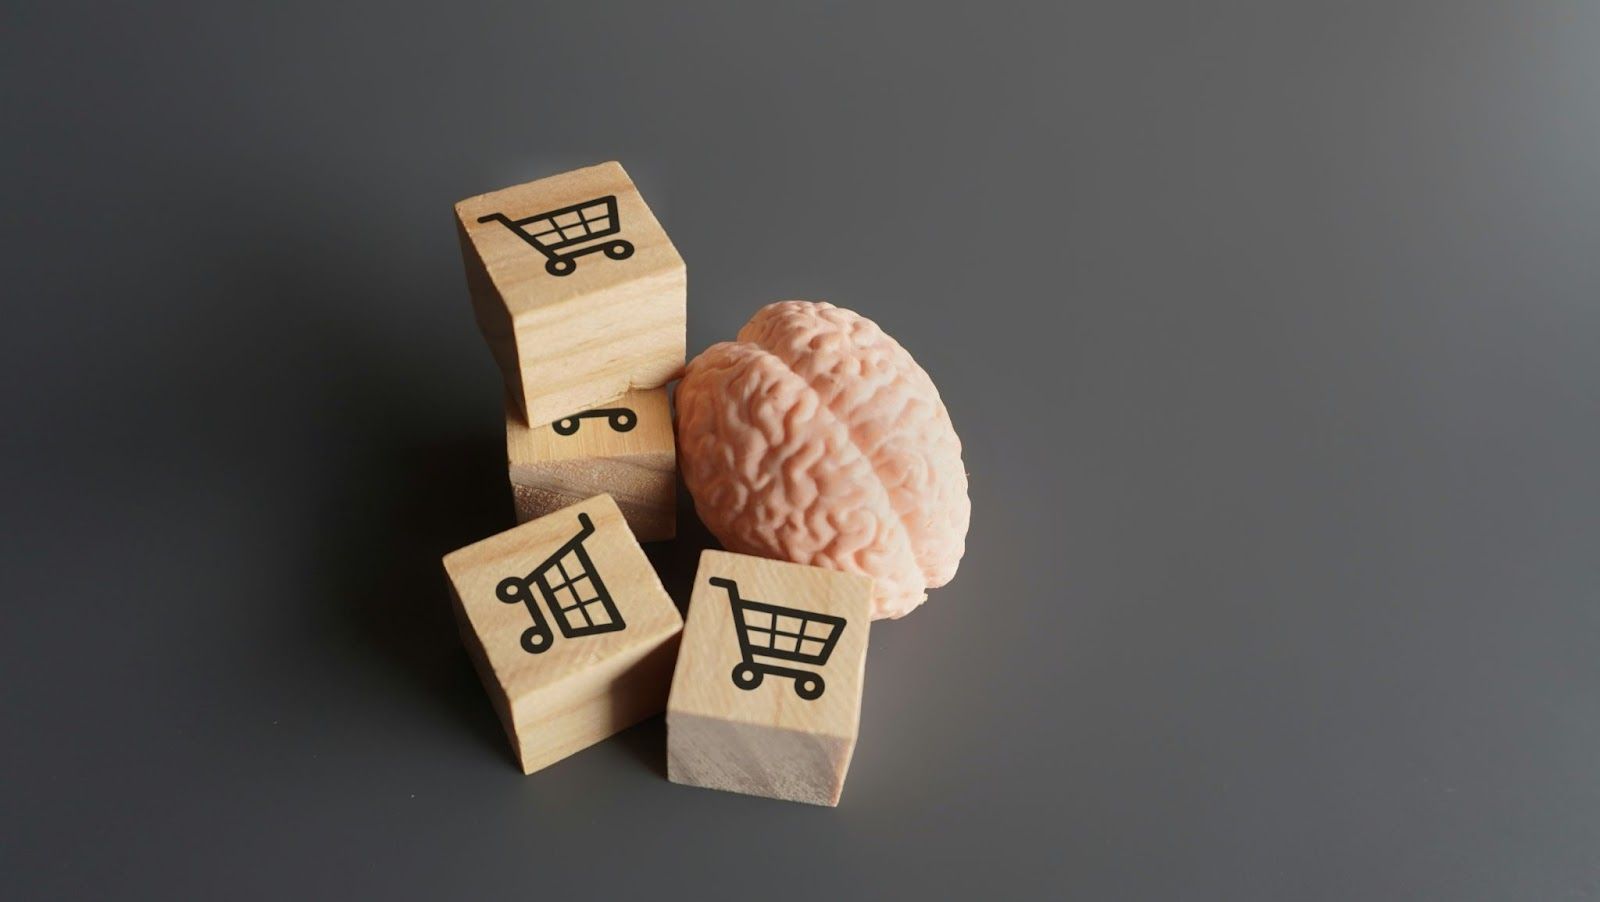 Wooden blocks stamped with shopping carts images, and a model human brain, against a gray background